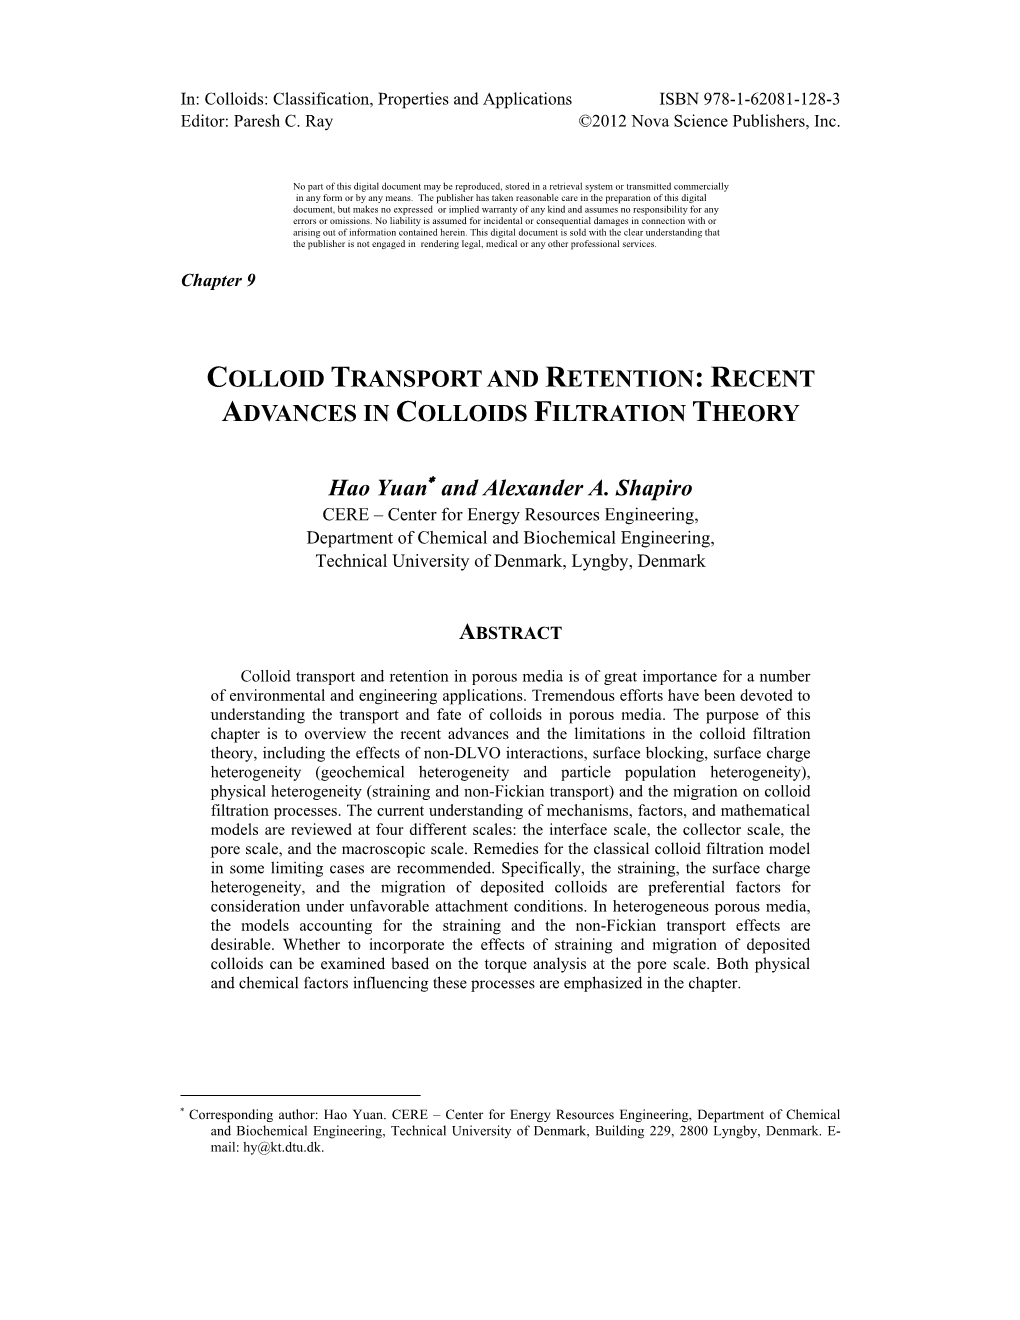 Colloid Transport and Retention: Recent Advances in Colloids Filtration Theory